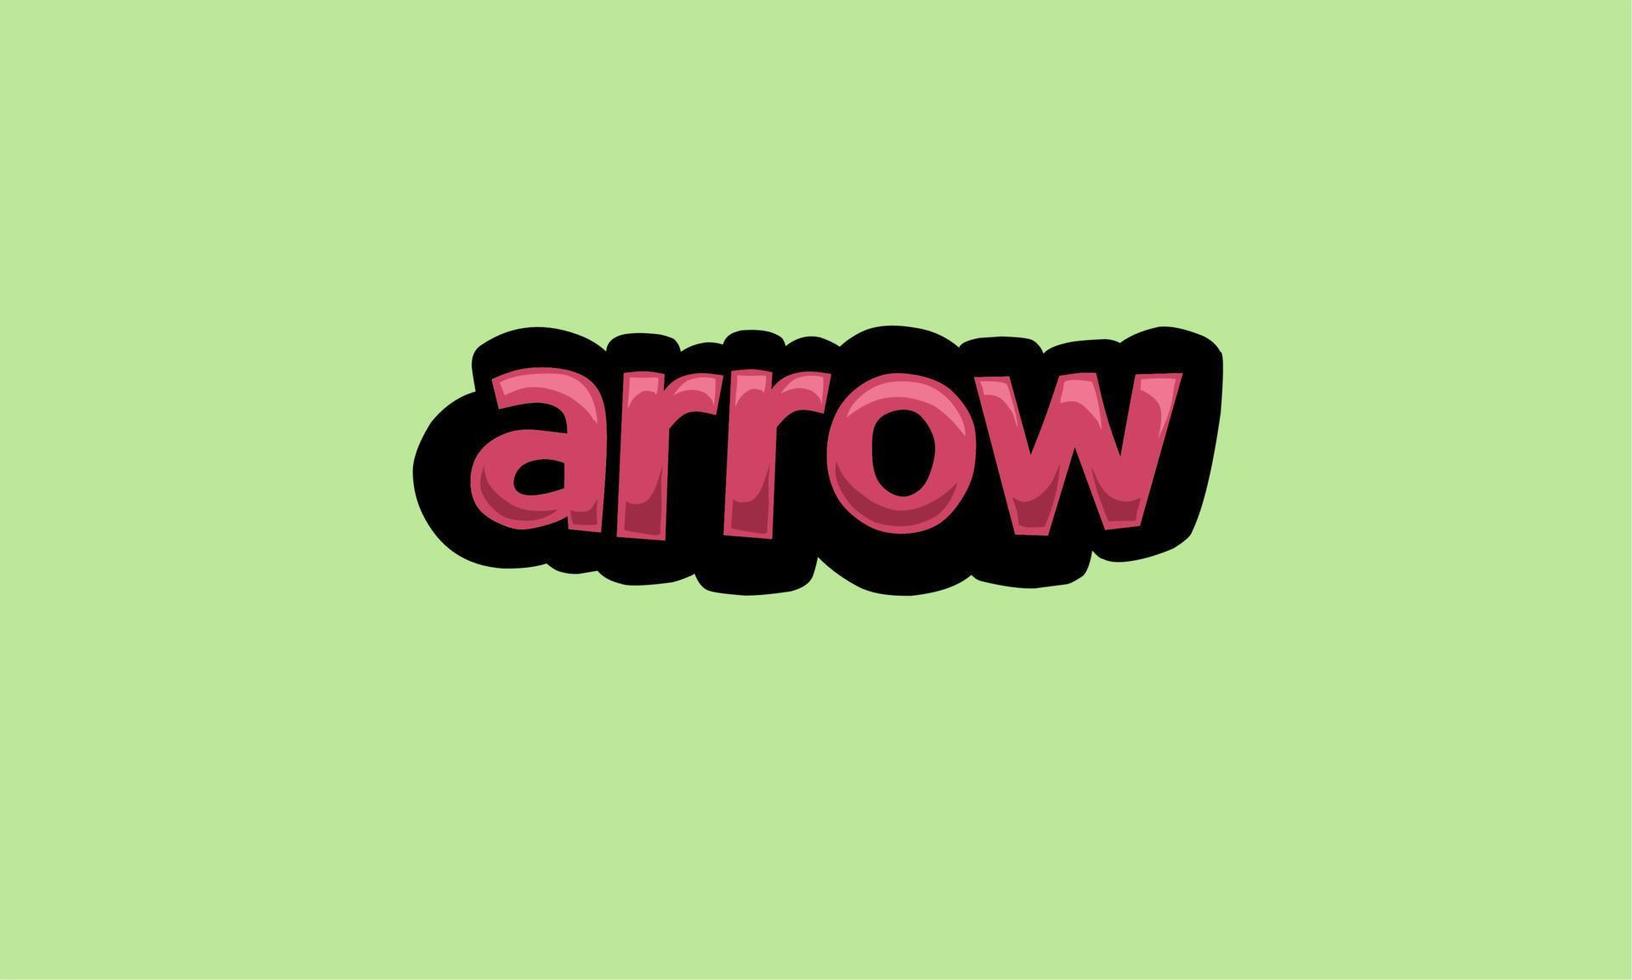 ARROW writing vector design on a green background